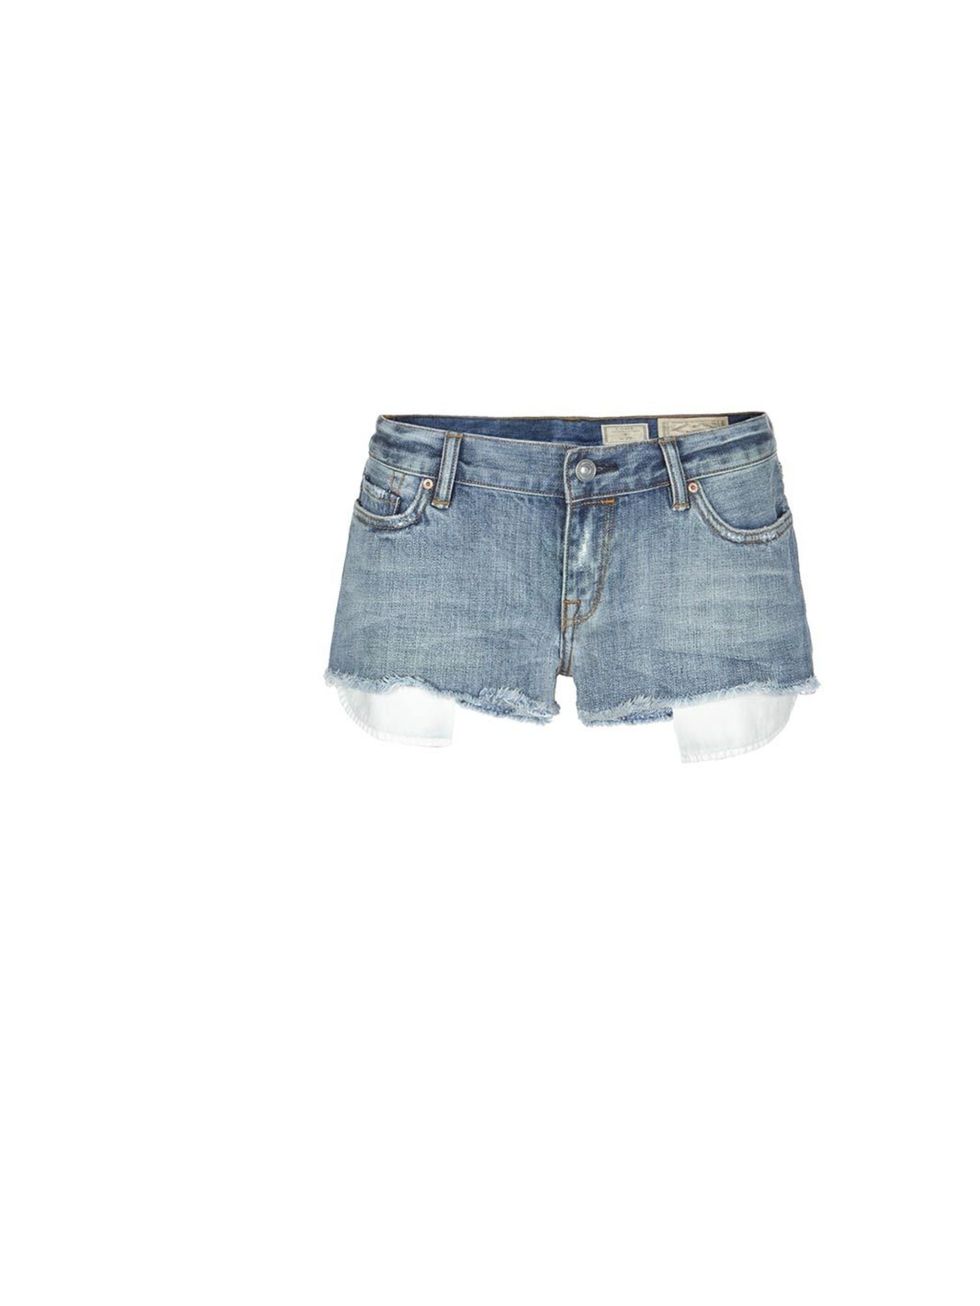 <p>Denim shorts are the ultimate festival staple. Make sure this pair from <a href="http://www.allsaints.com/women/shorts/allsaints-haru-lowe/?colour=21&amp;category=328">All Saints</a> are the first thing to go in your rucksack, £55</p>